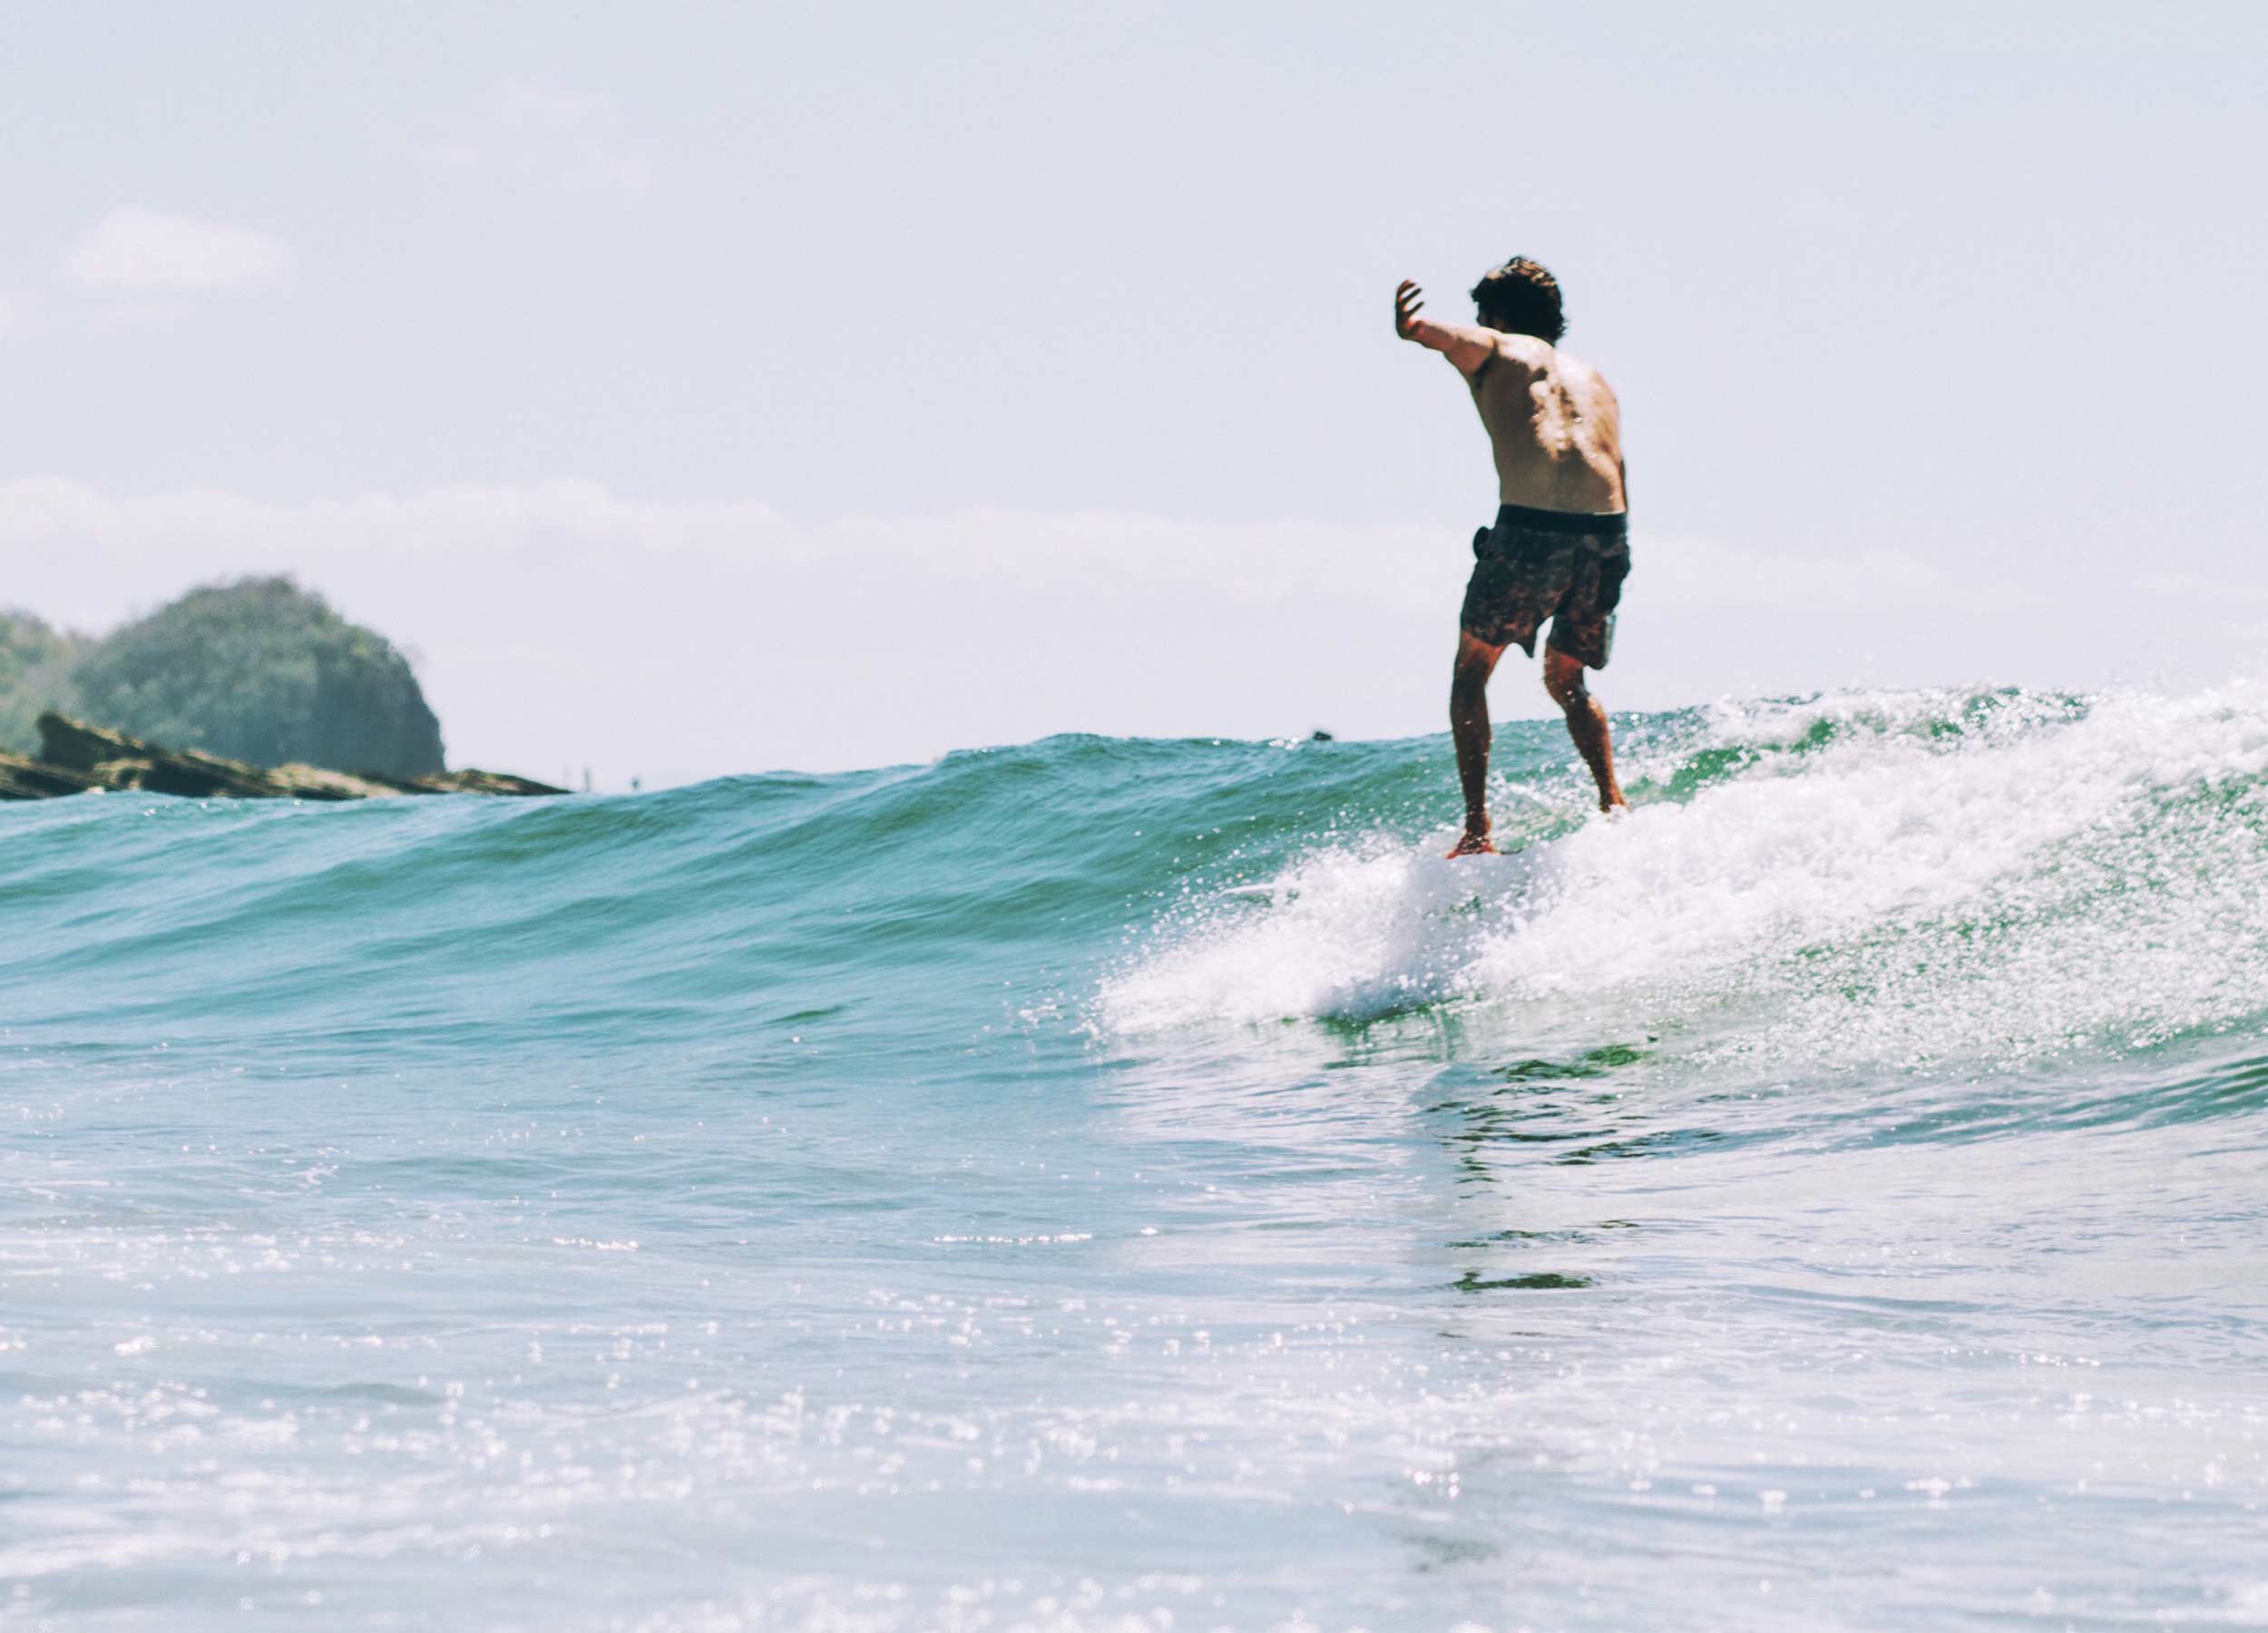 The Proper Surfing Stance - Feet and Lower Body positioning